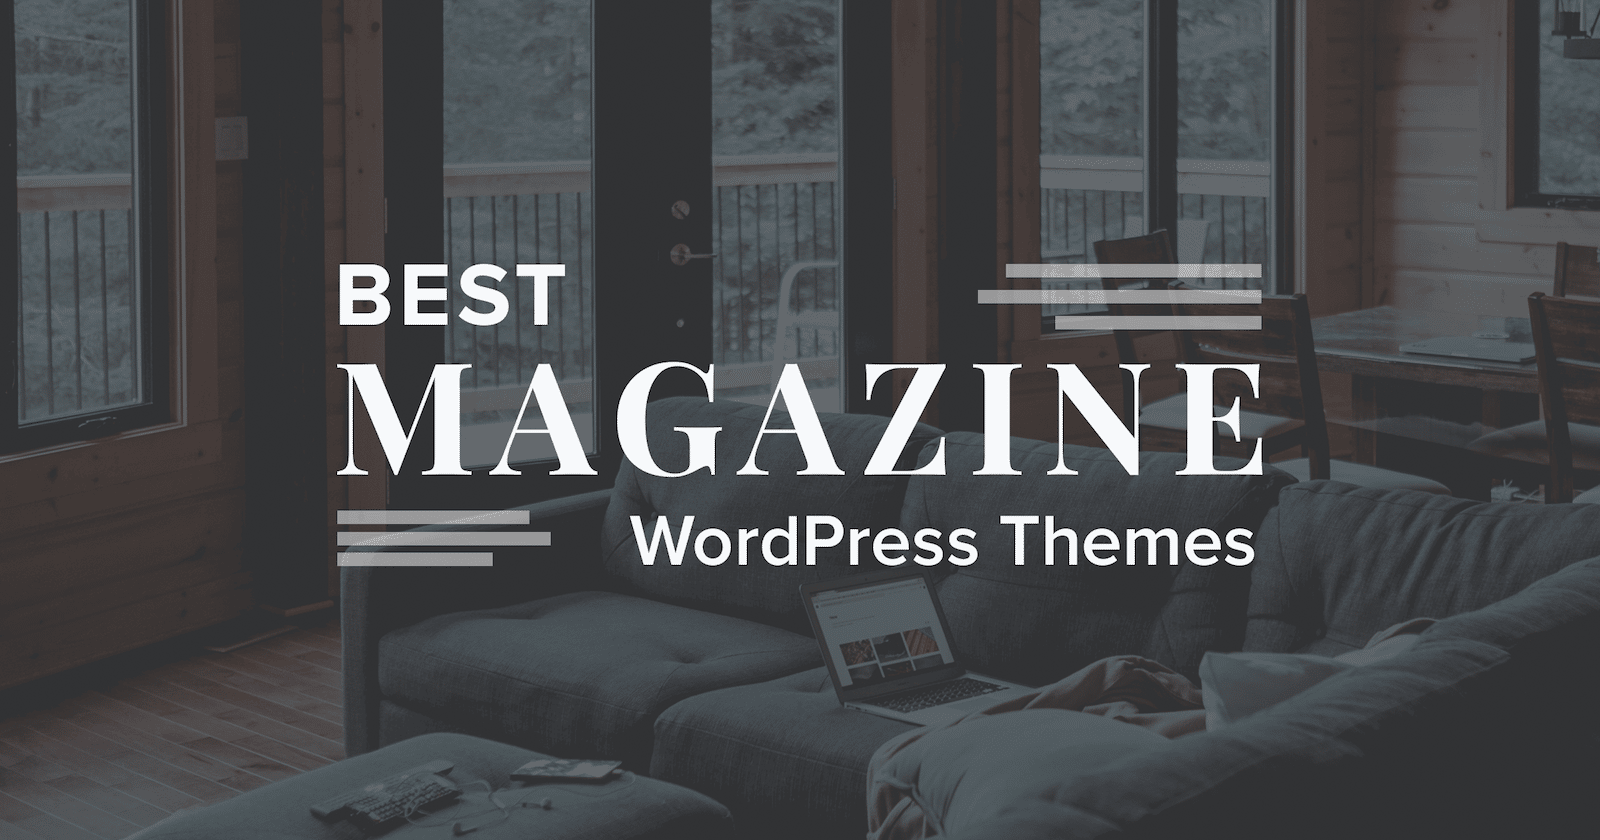 We looked for the best WordPress magazine themes for 2017